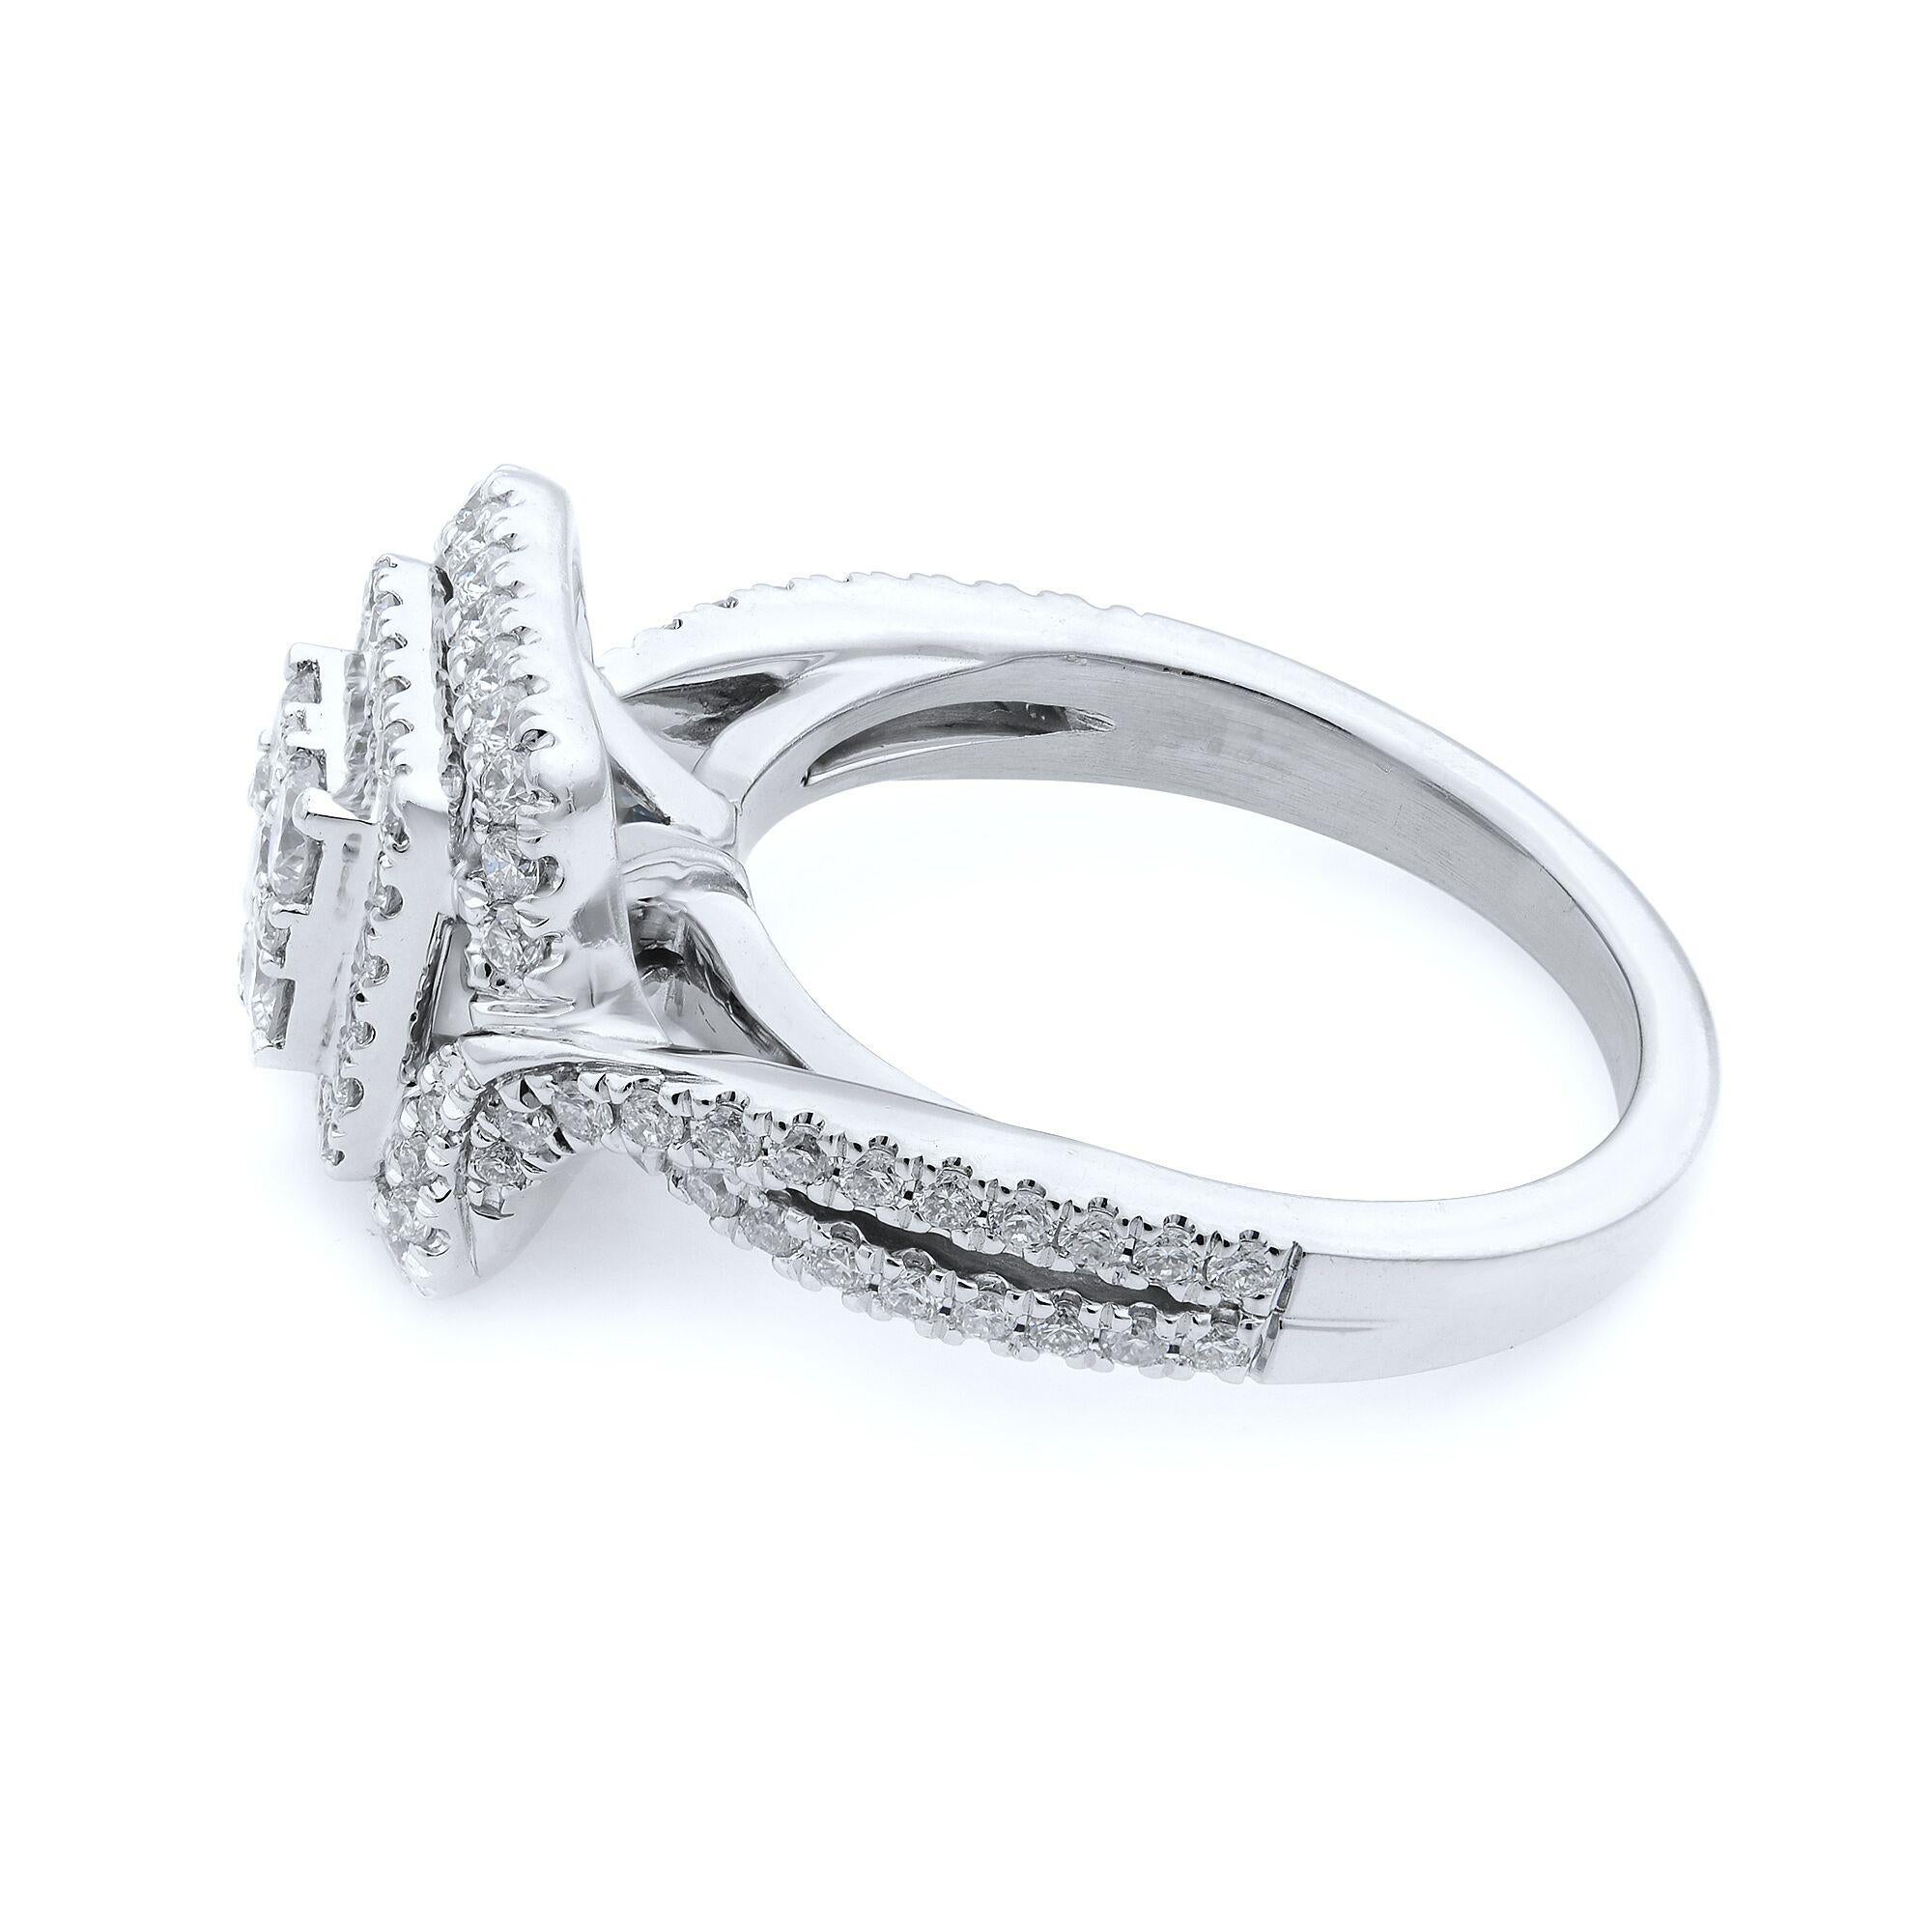 This pave double halo diamond engagement ring is styled with stunning princess cut center and round cut diamonds. The ring is beautifully enclosed in marvelous double halo studded dazzling diamonds and the split shank pattern of the ring is further